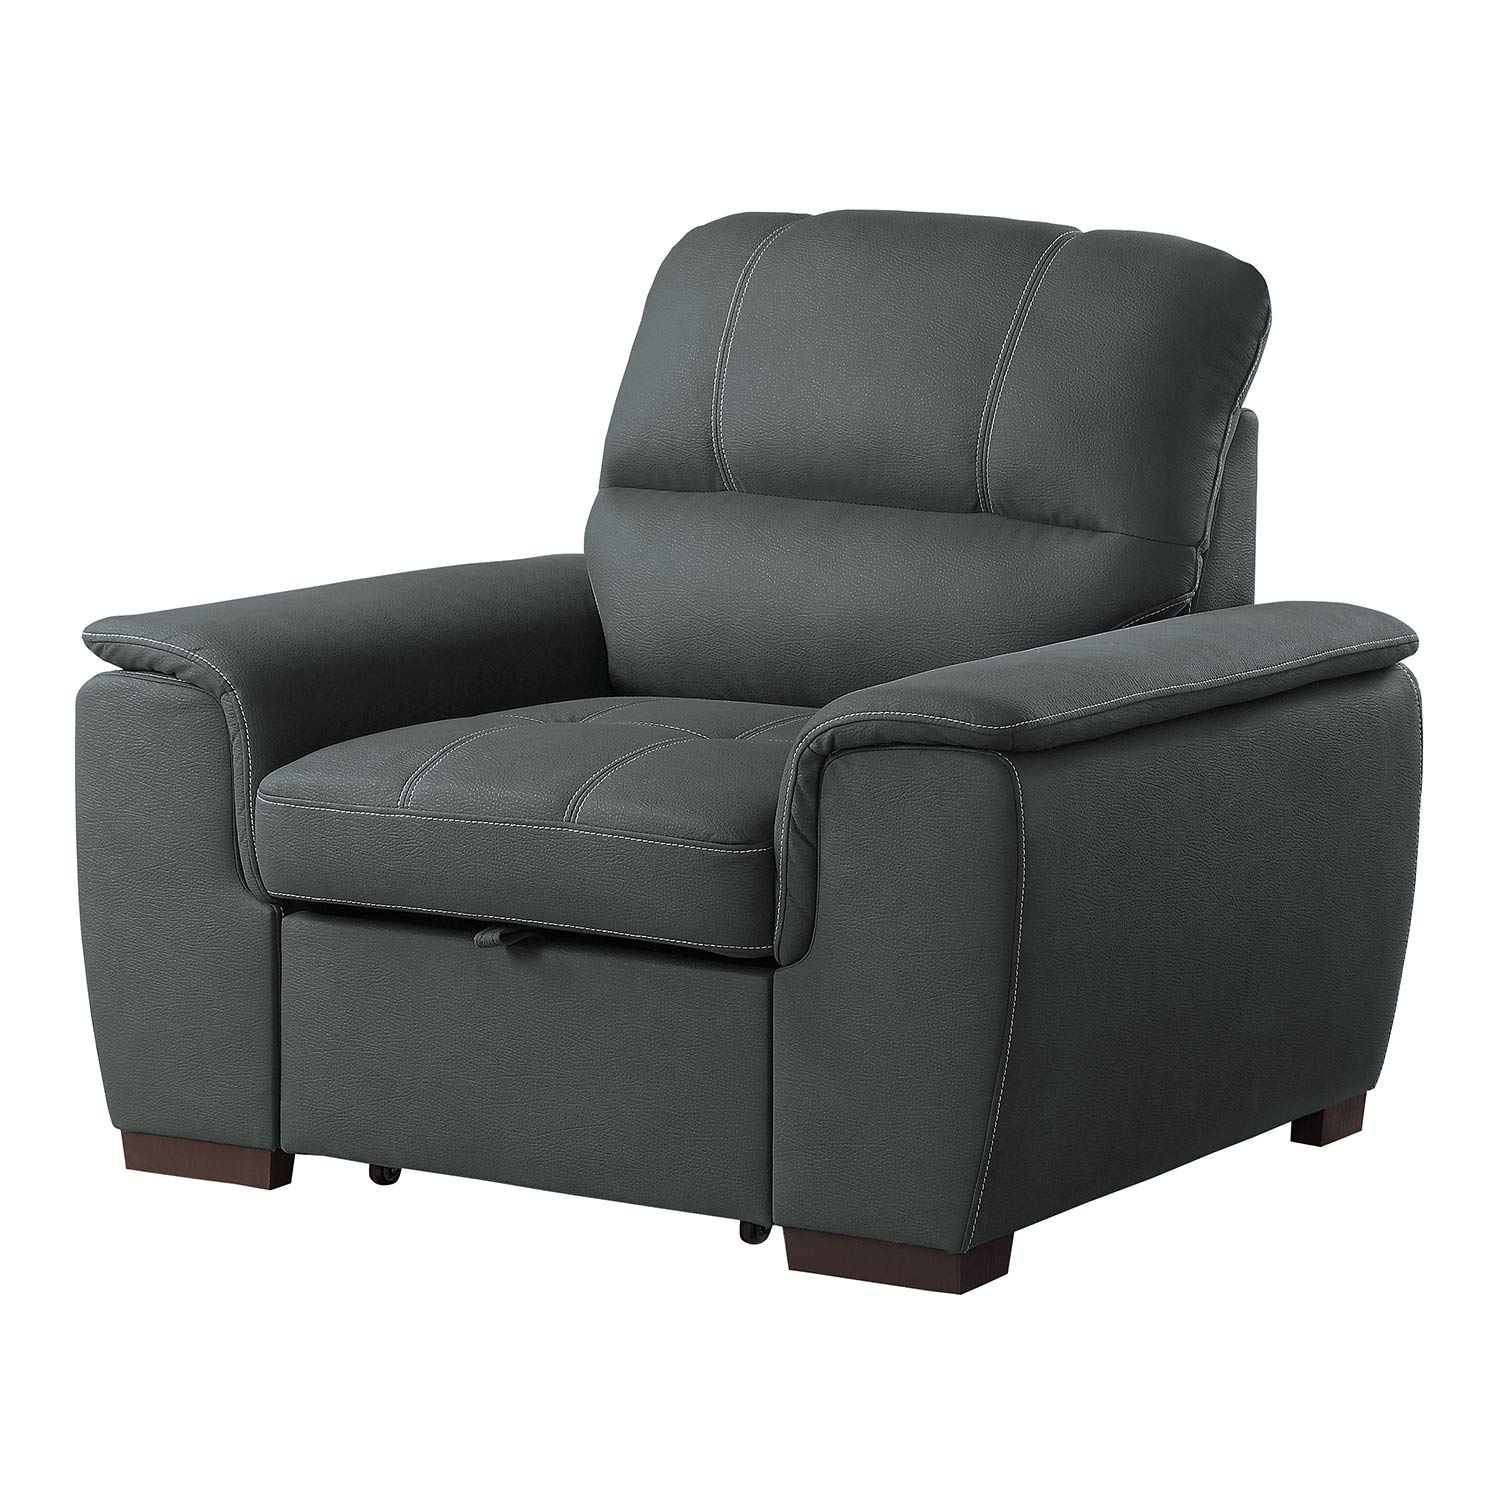 Homelegance Andes Chair with Pull-out Ottoman - Gray